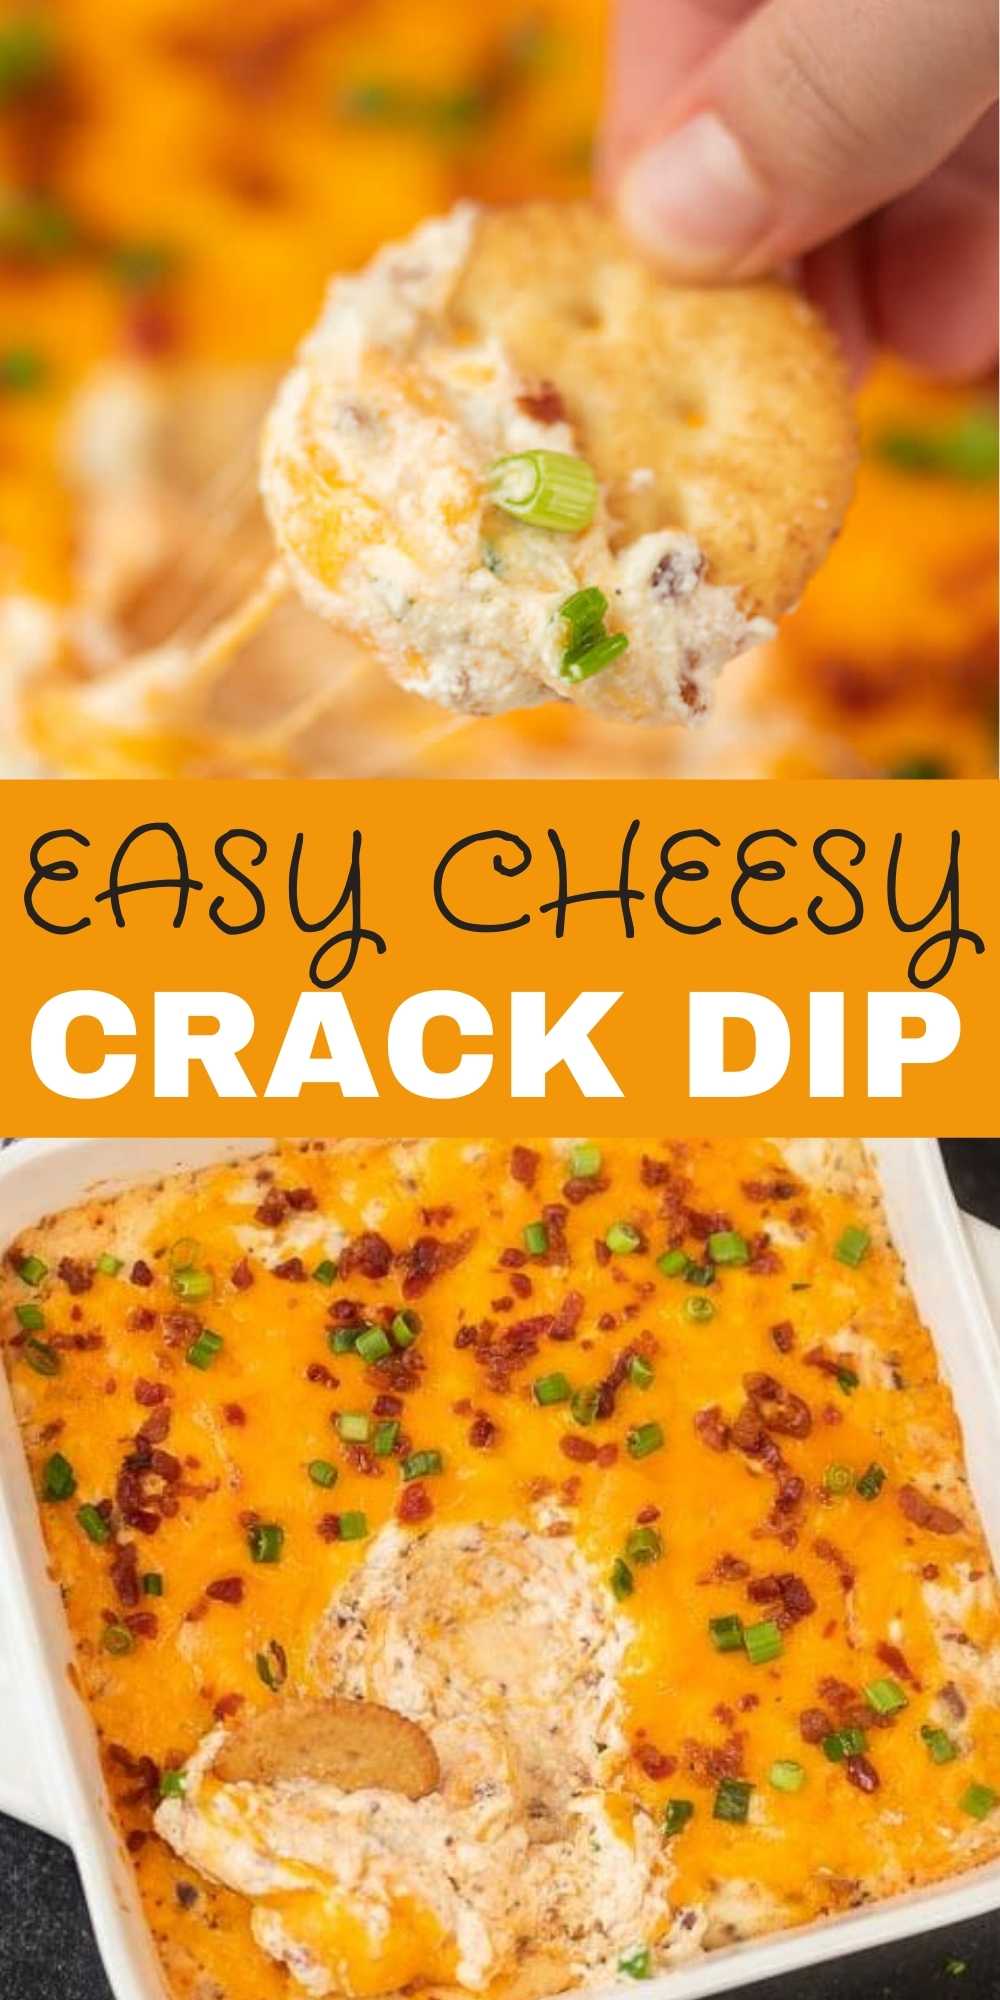 This is the best crock dip recipe with sour cream and cream cheese.  You are going to love this warm cheesy crack dip recipe that is perfect fo your next party! #eatingonadime #diprecipes #crackrecipes #appetizerrecipes 
